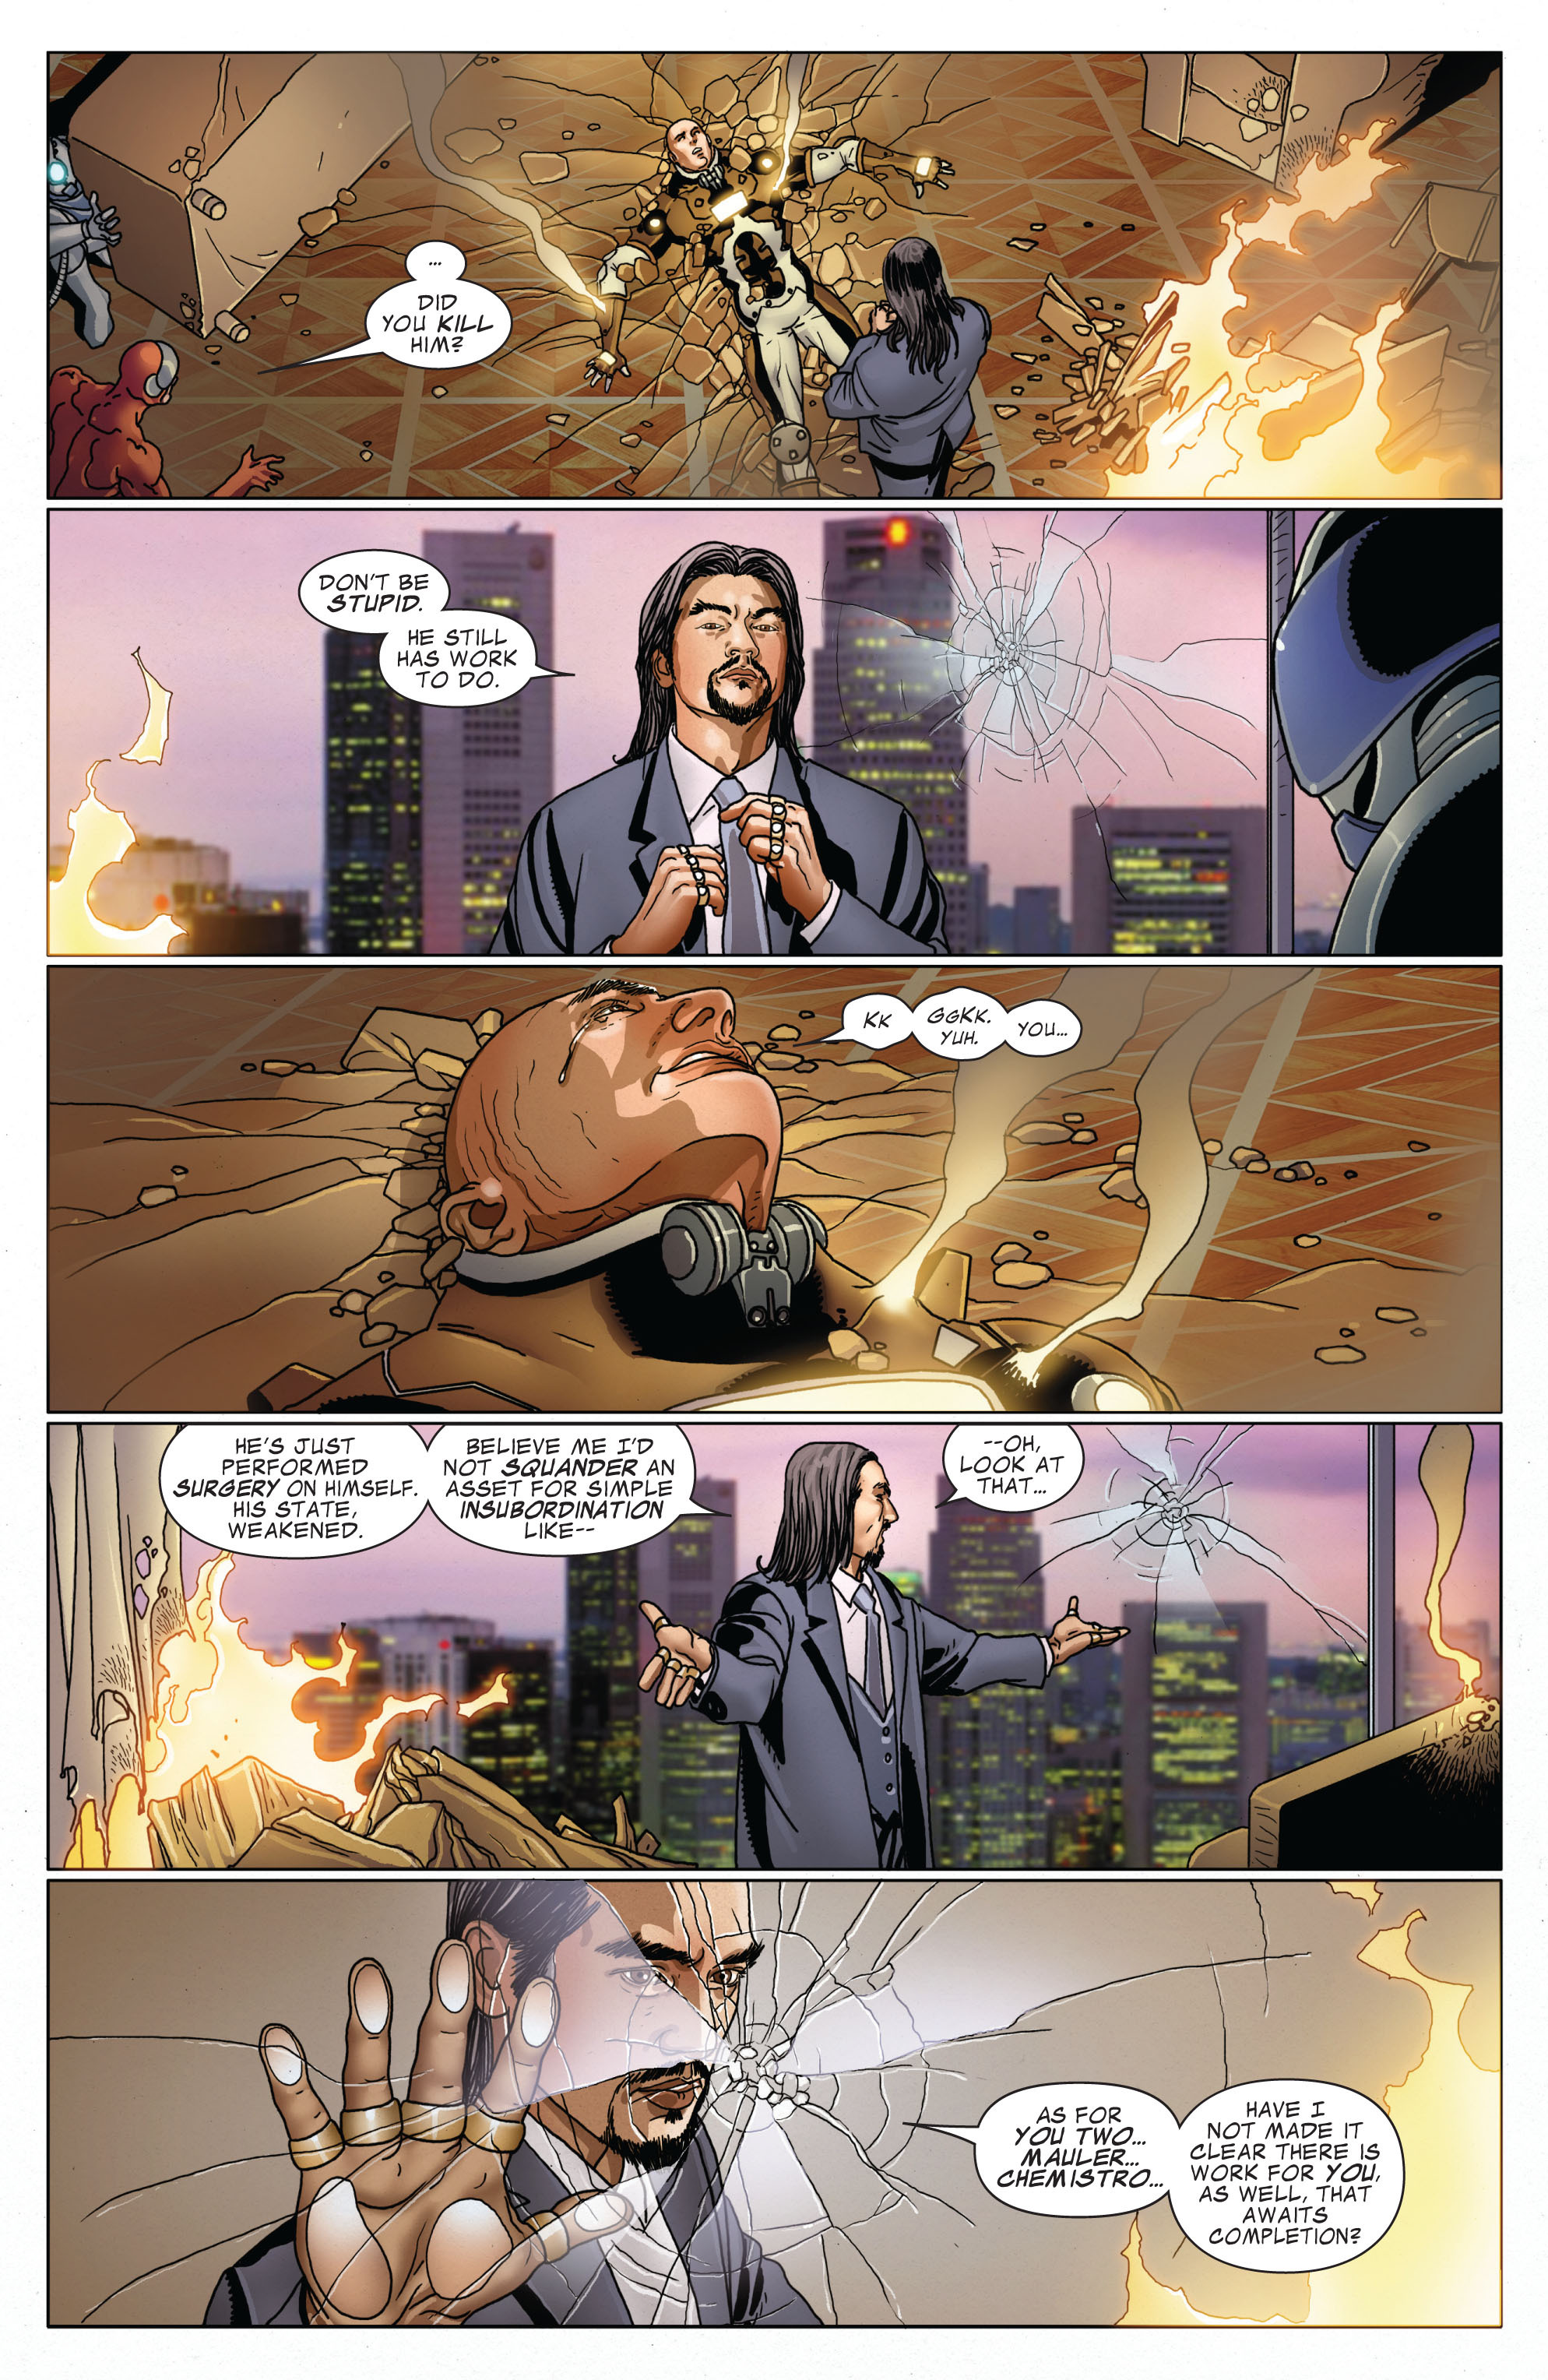 Invincible Iron Man (2008) 519 Page 4